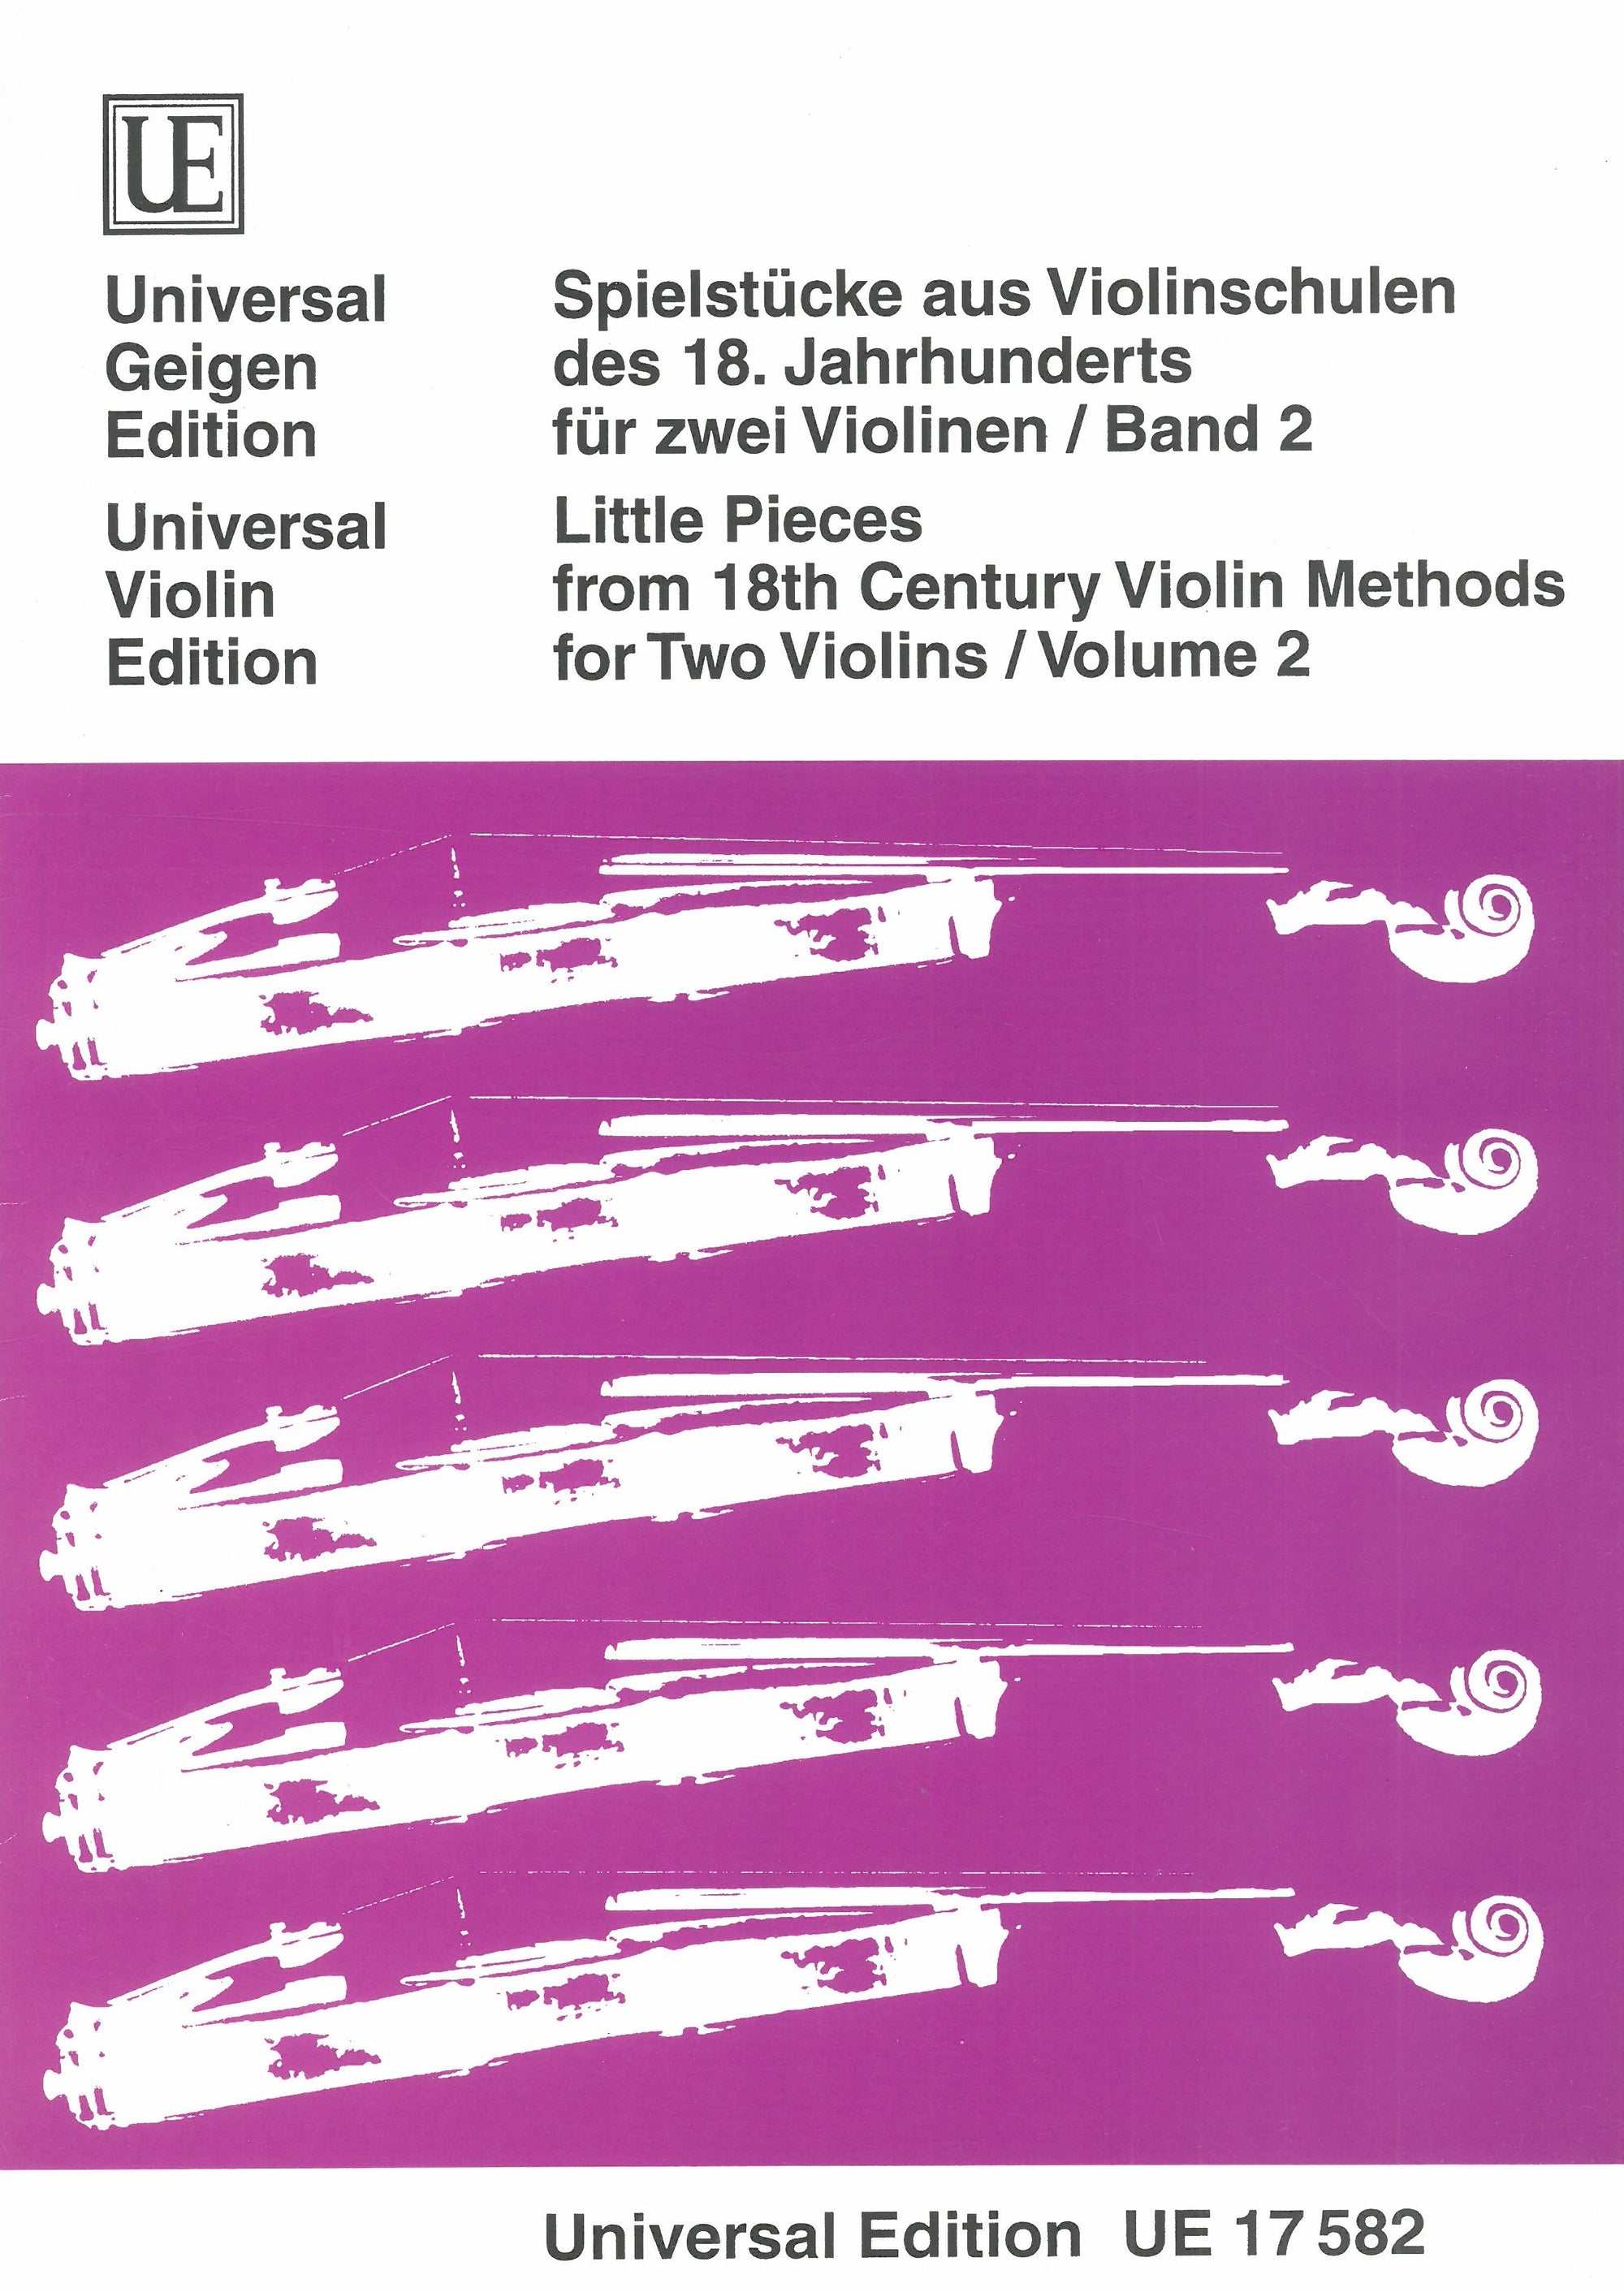 Little Pieces from 18th Century Violin Methods - Volume 2